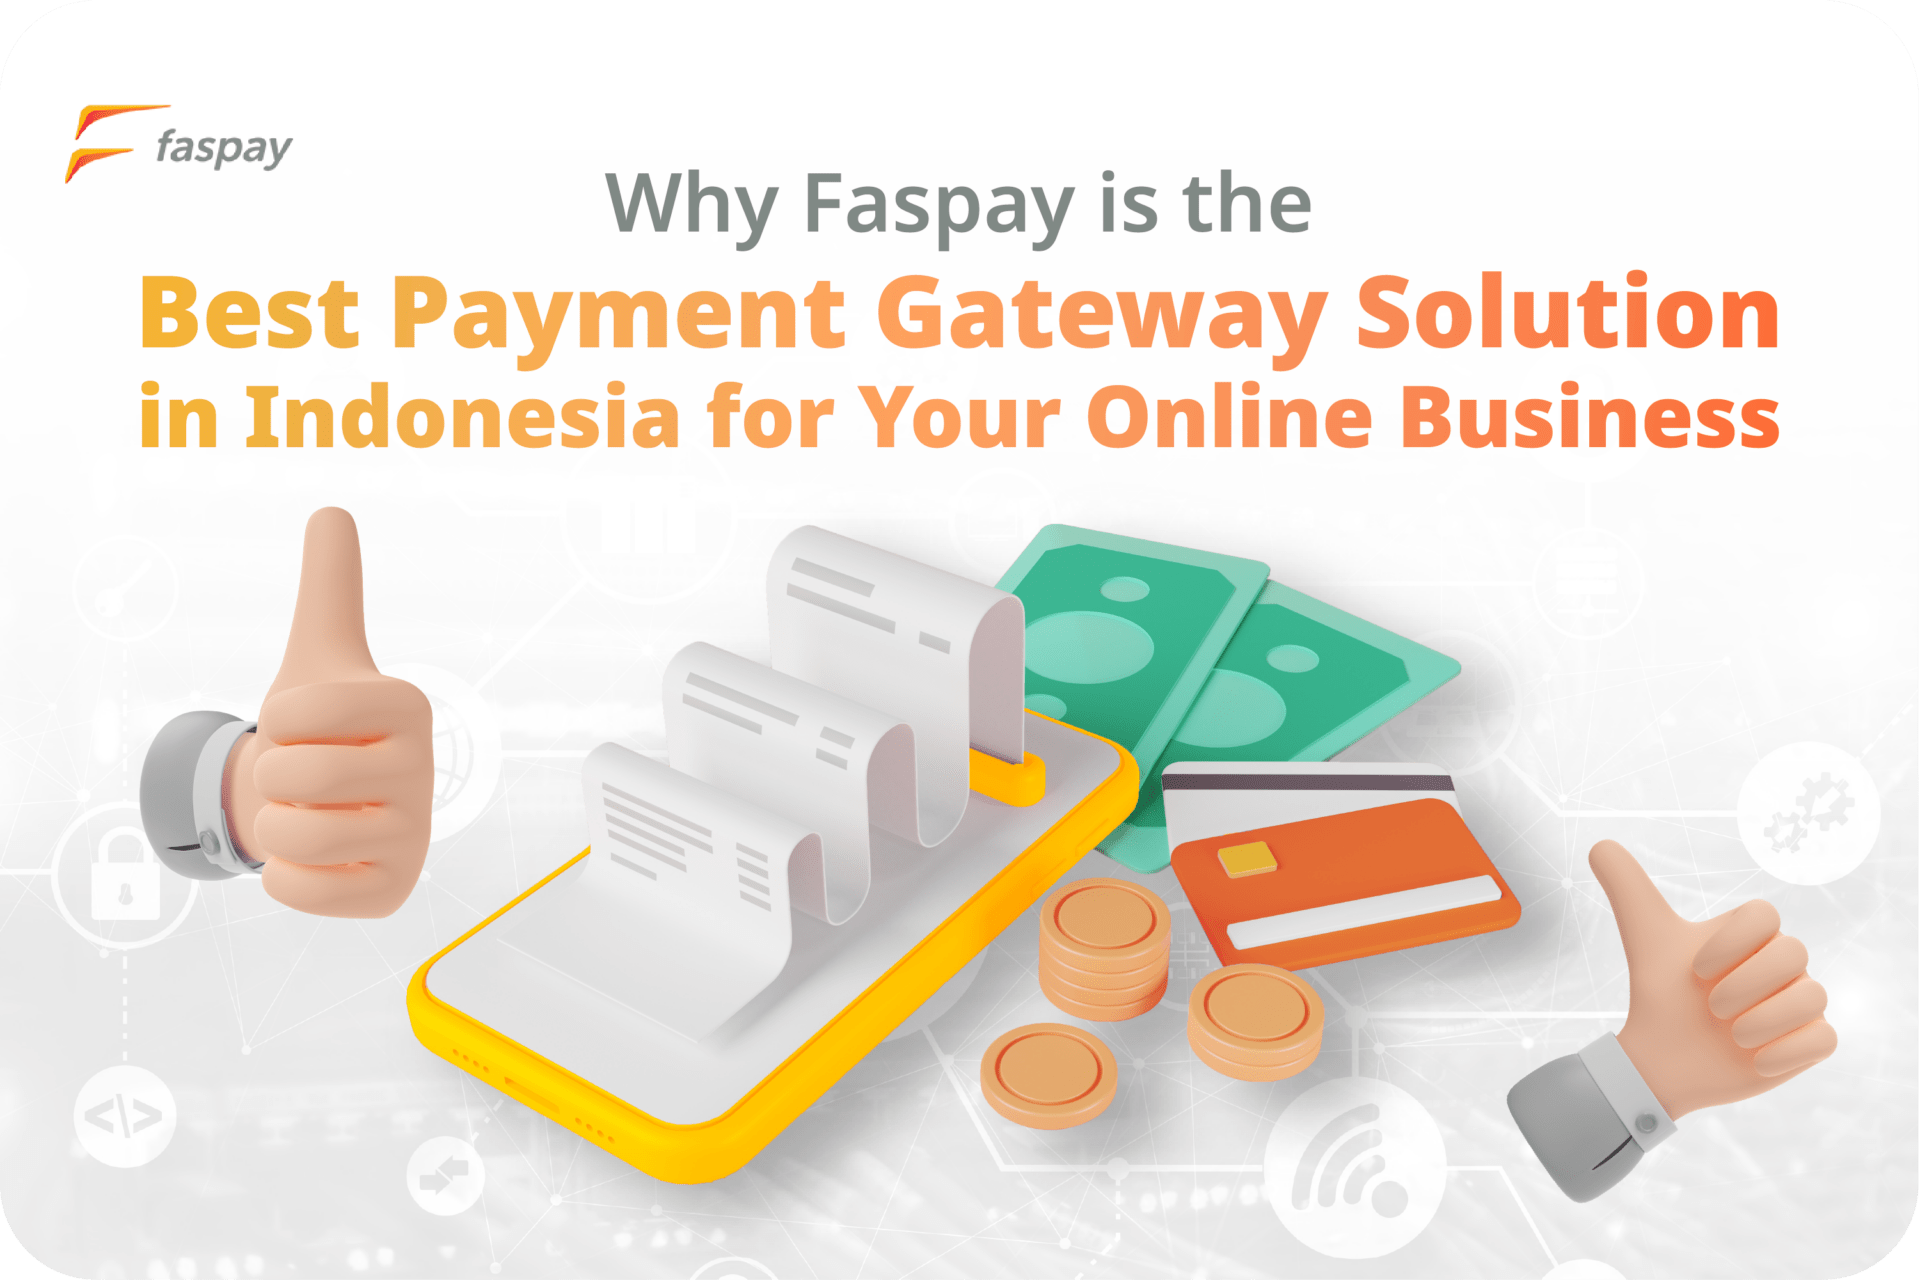 Why Is the Best Payment Gateway Solution in Indonesia For Your Online Bussiness